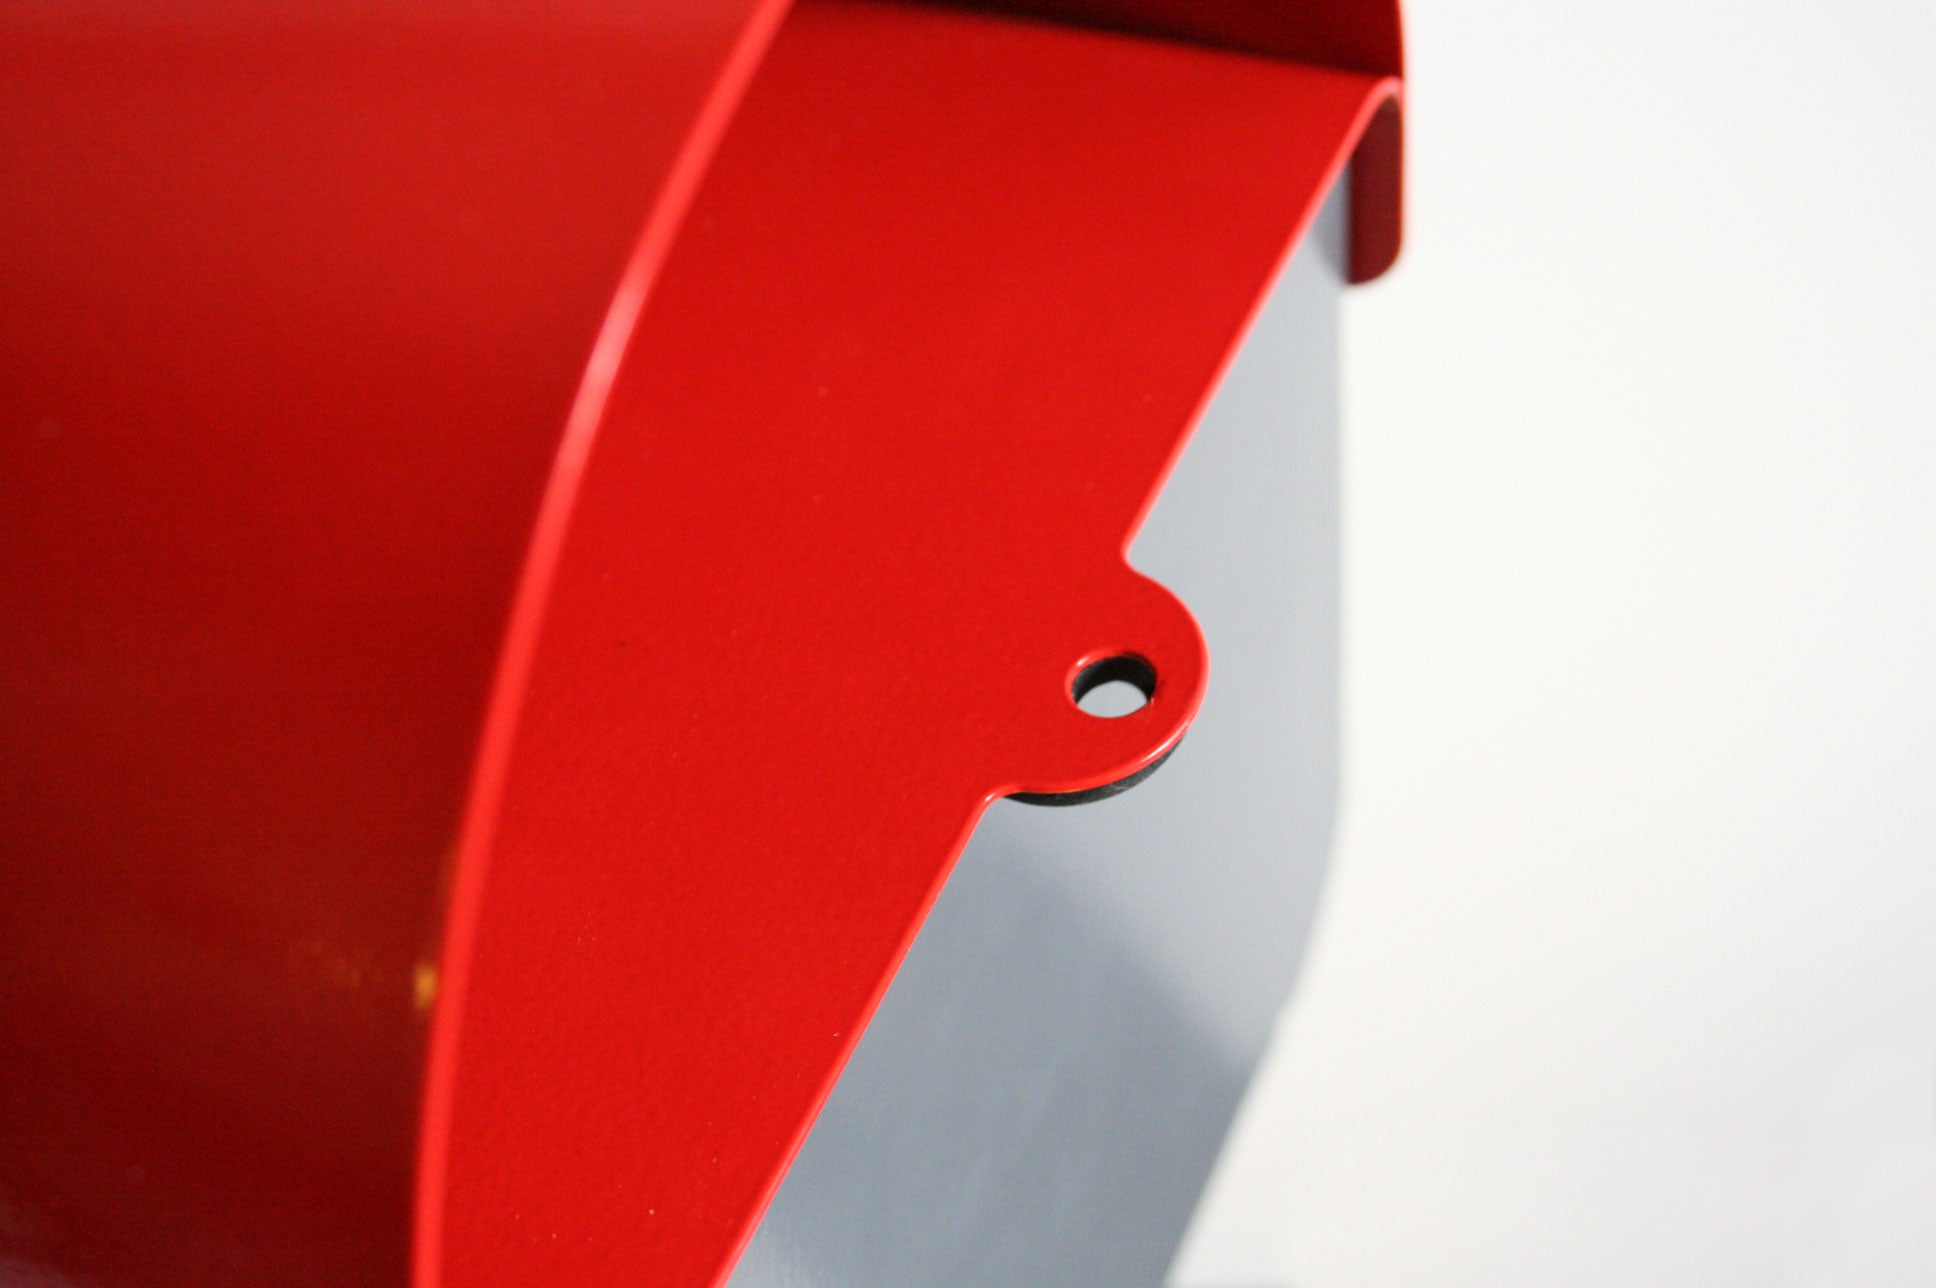 TomTom Letterbox | Outdoor Accessories | Red, Yellow, Blue, Grey | DesignByThem